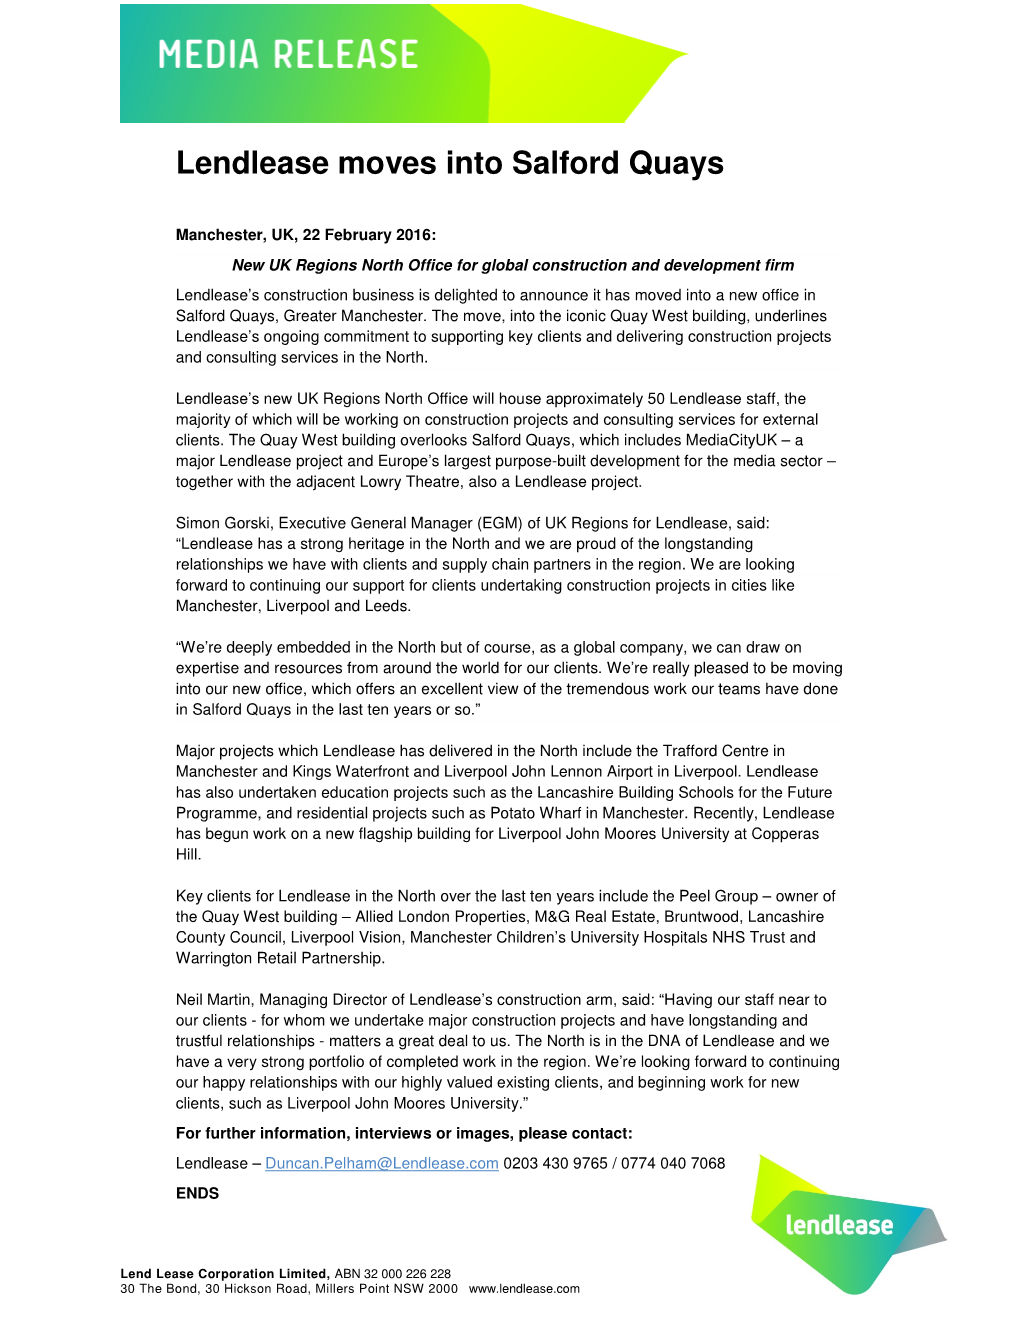 Lendlease Moves Into Salford Quays